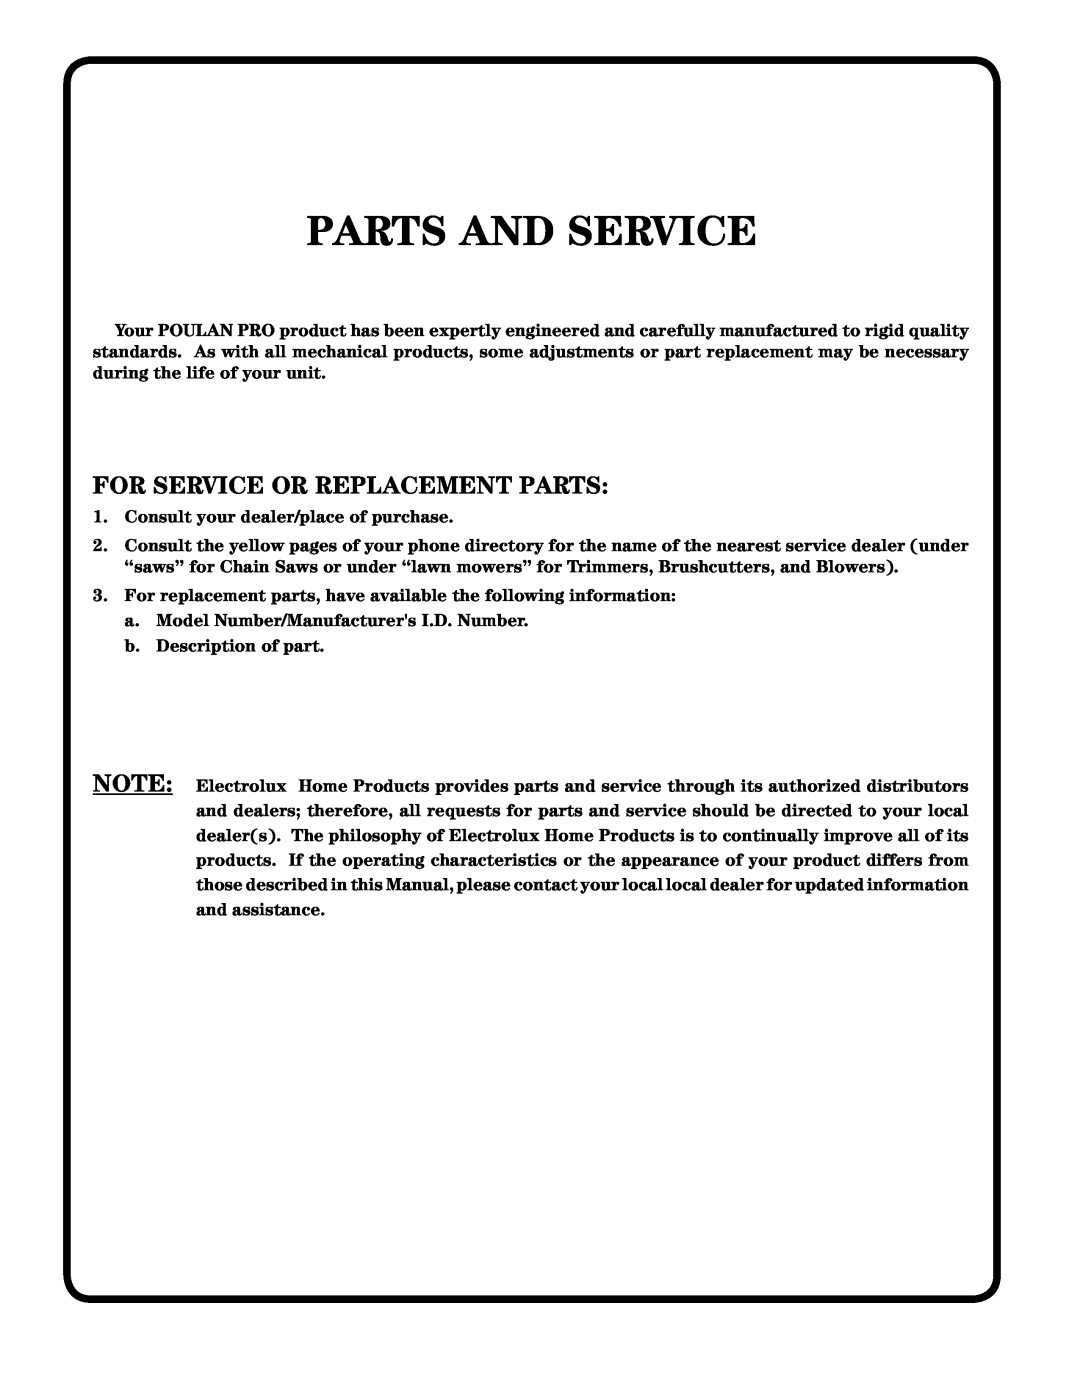 Poulan PD20PH48STB owner manual Parts And Service, For Service Or Replacement Parts 